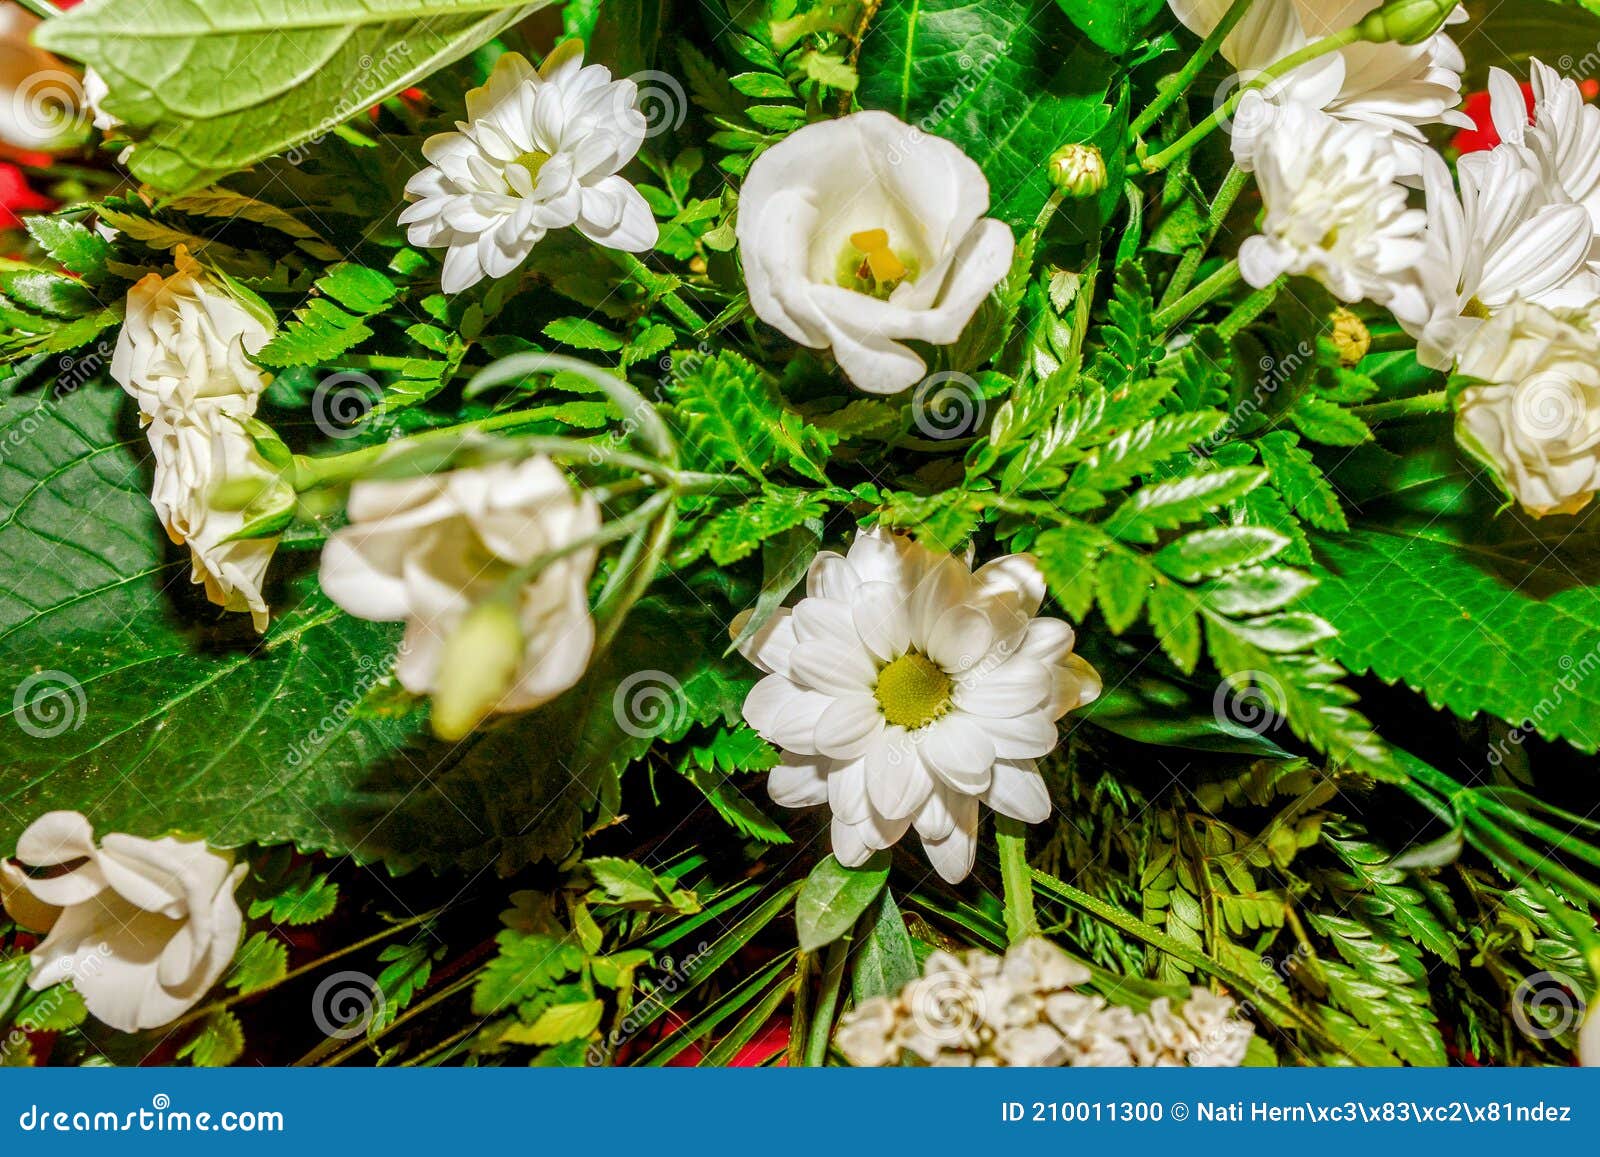 floral decoration with daisies and white eustoma with green background. lisianthus.